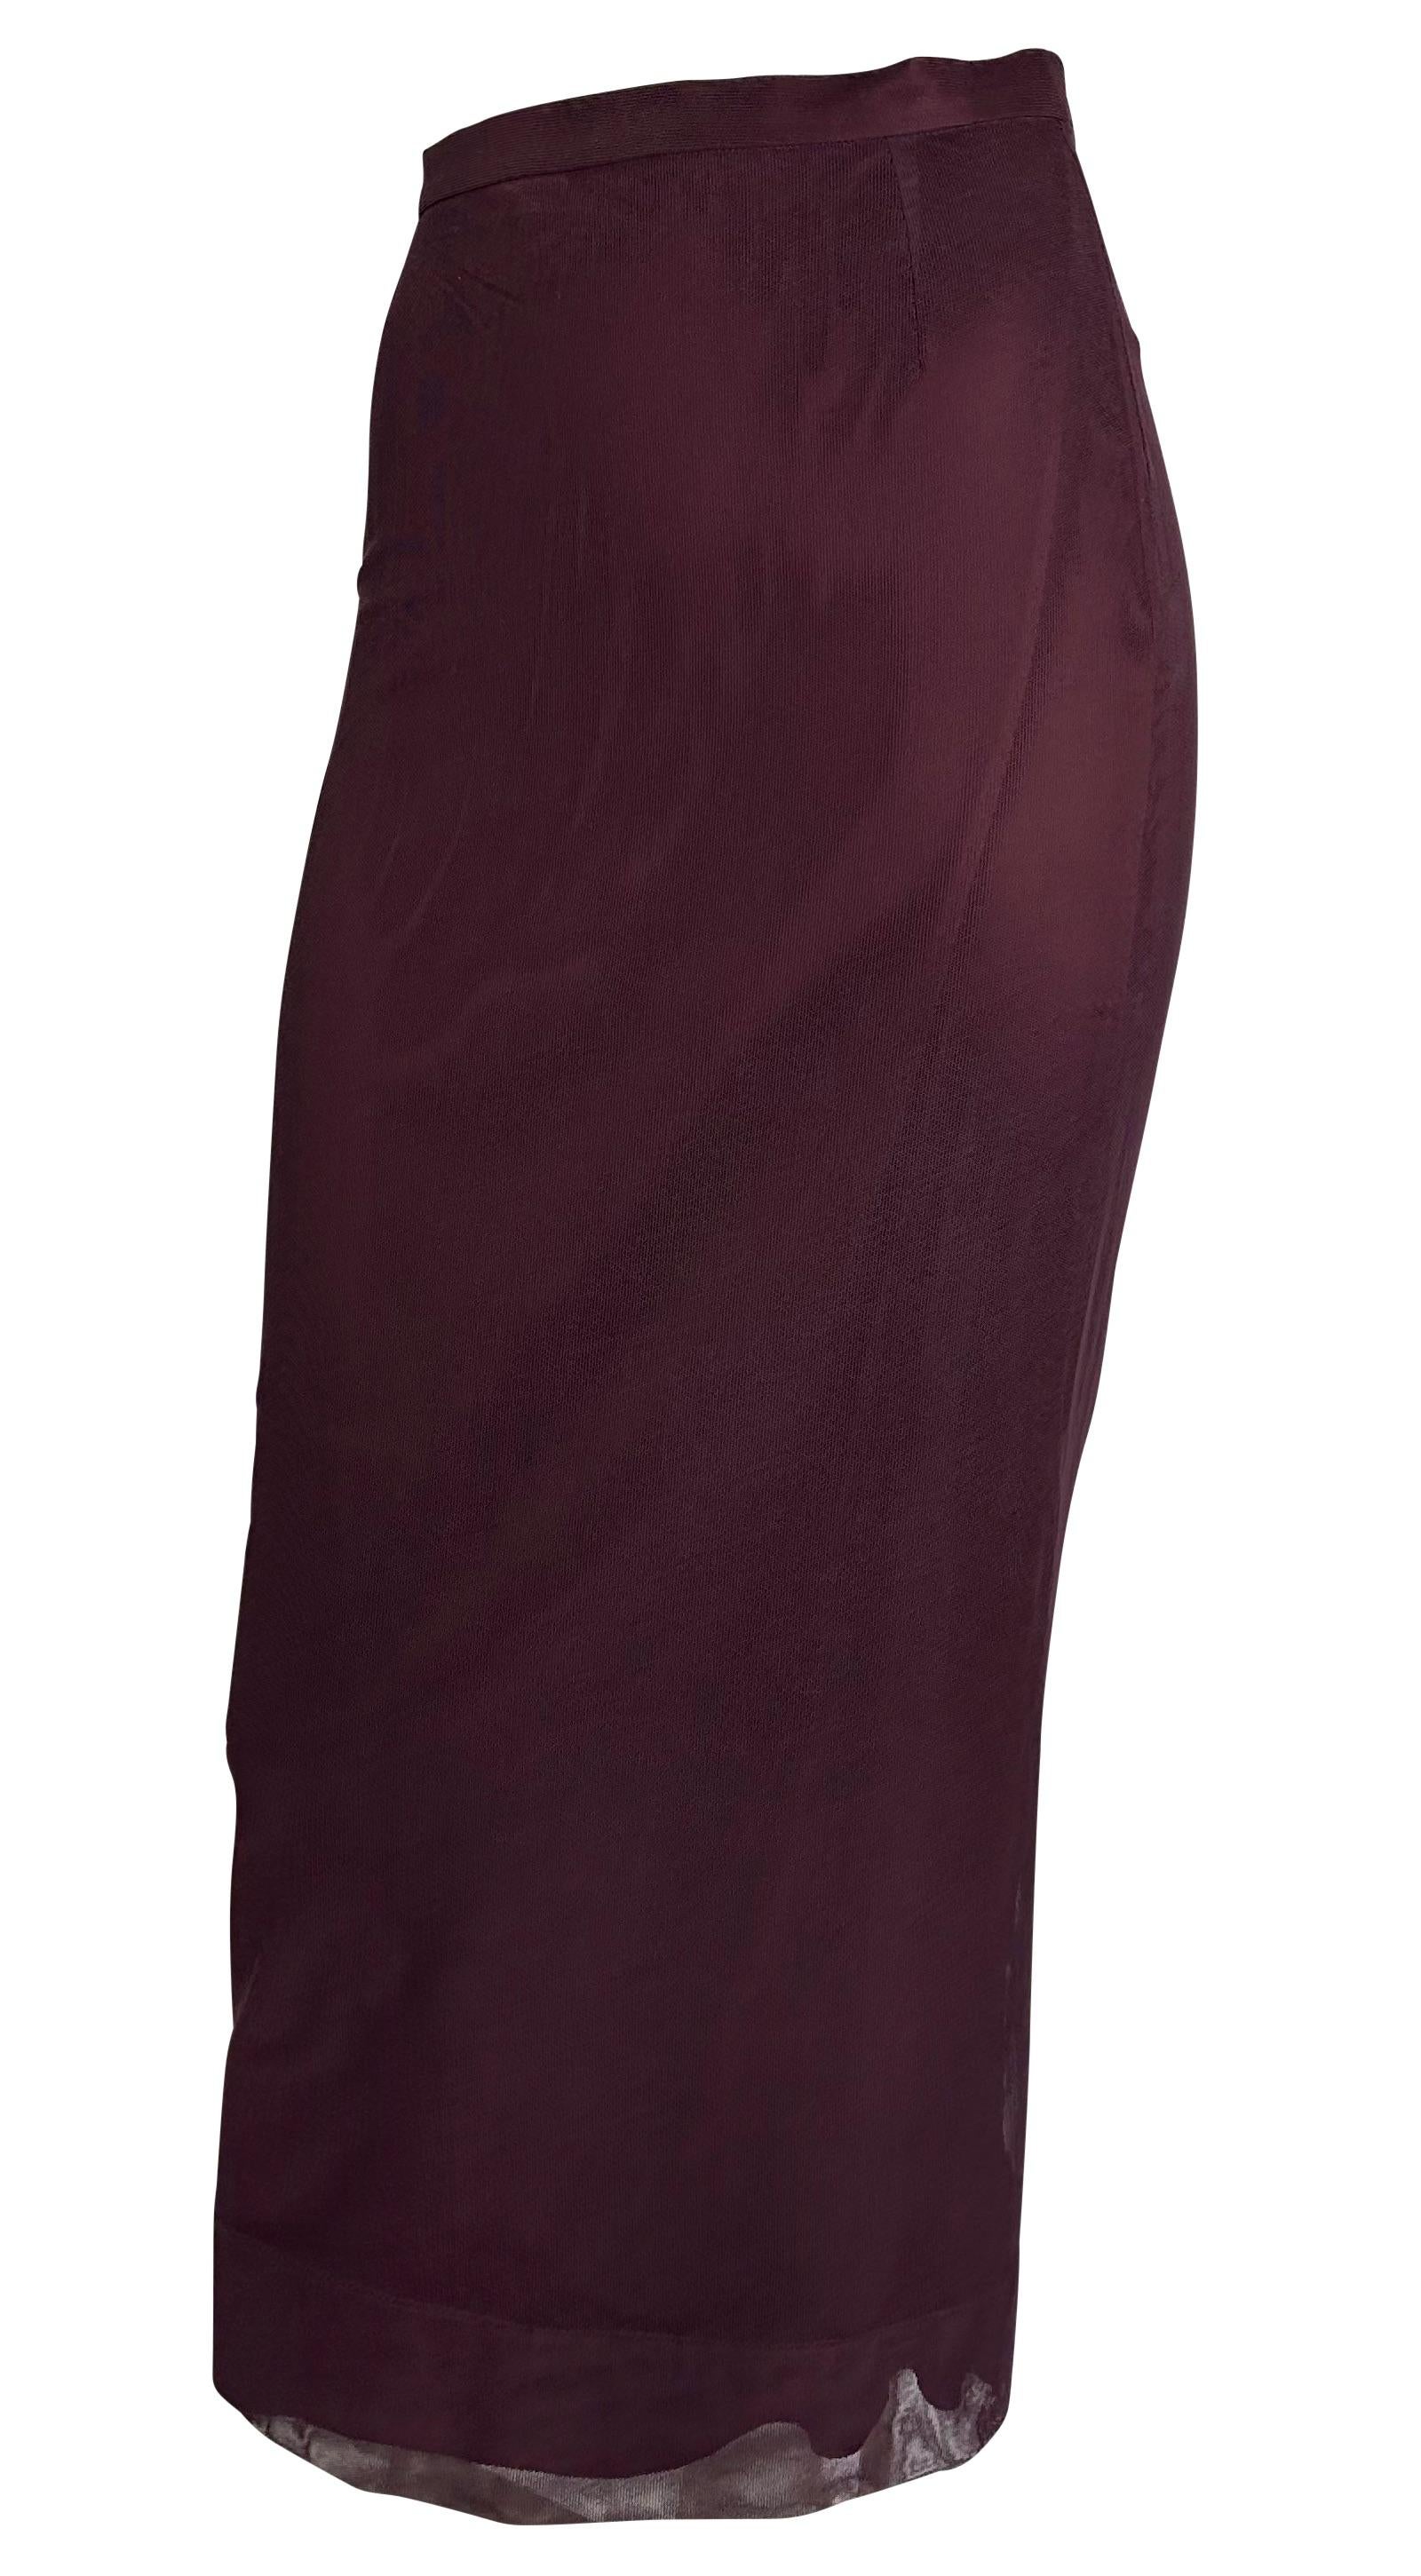 Presenting a beautiful burgundy Dolce and Gabbana mesh maxi skirt. From the Spring/Summer 1998 collection, this fabulous maxi skirt features a high waist with a mesh overlay. Effortlessly chic, this vintage skirt is the perfect on-trend piece to add